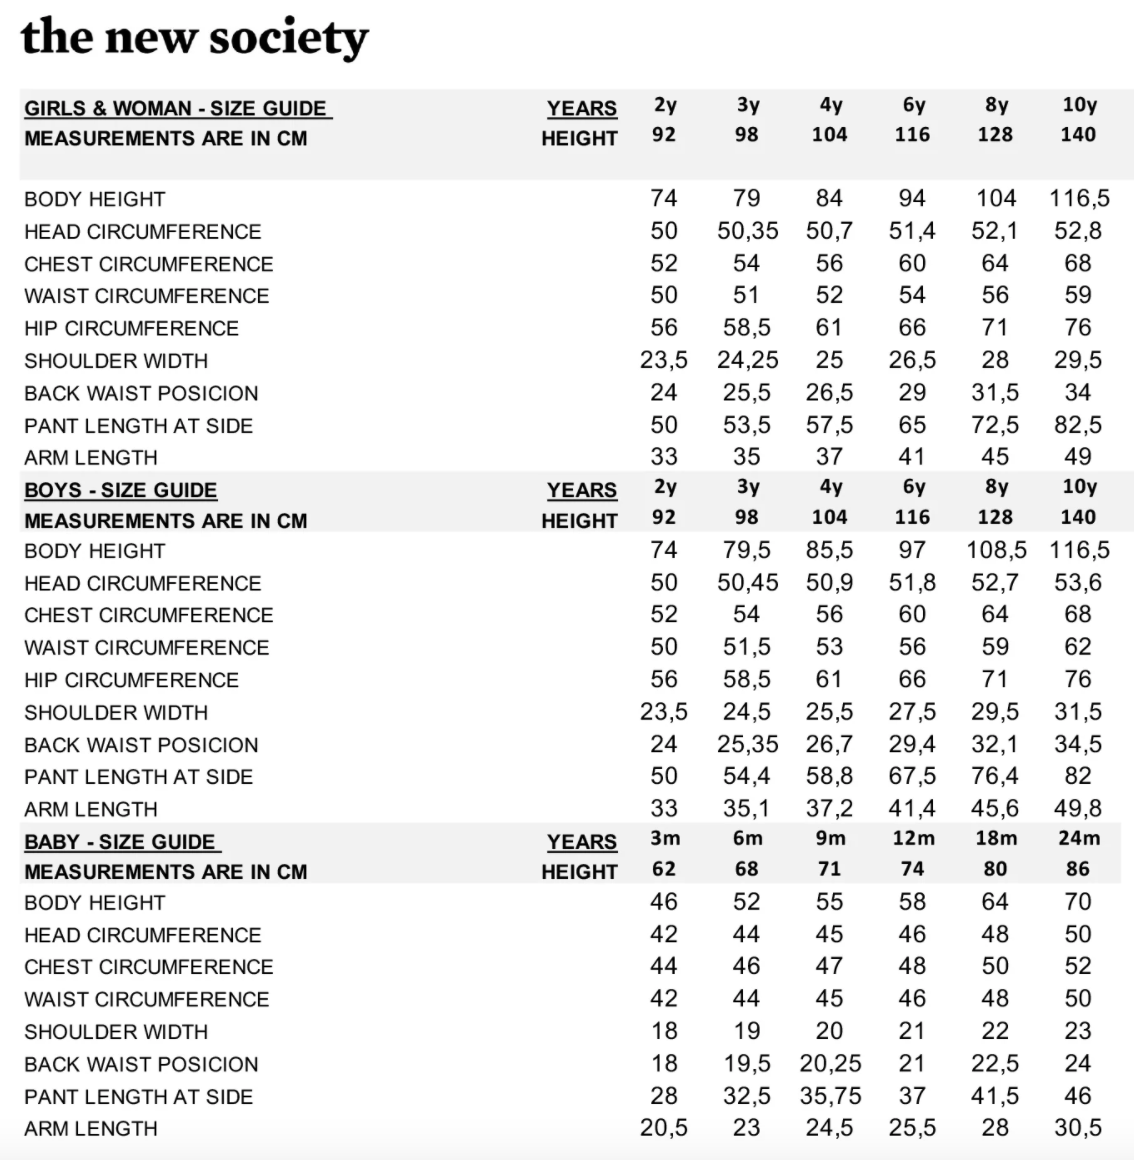 The New Society Size guid